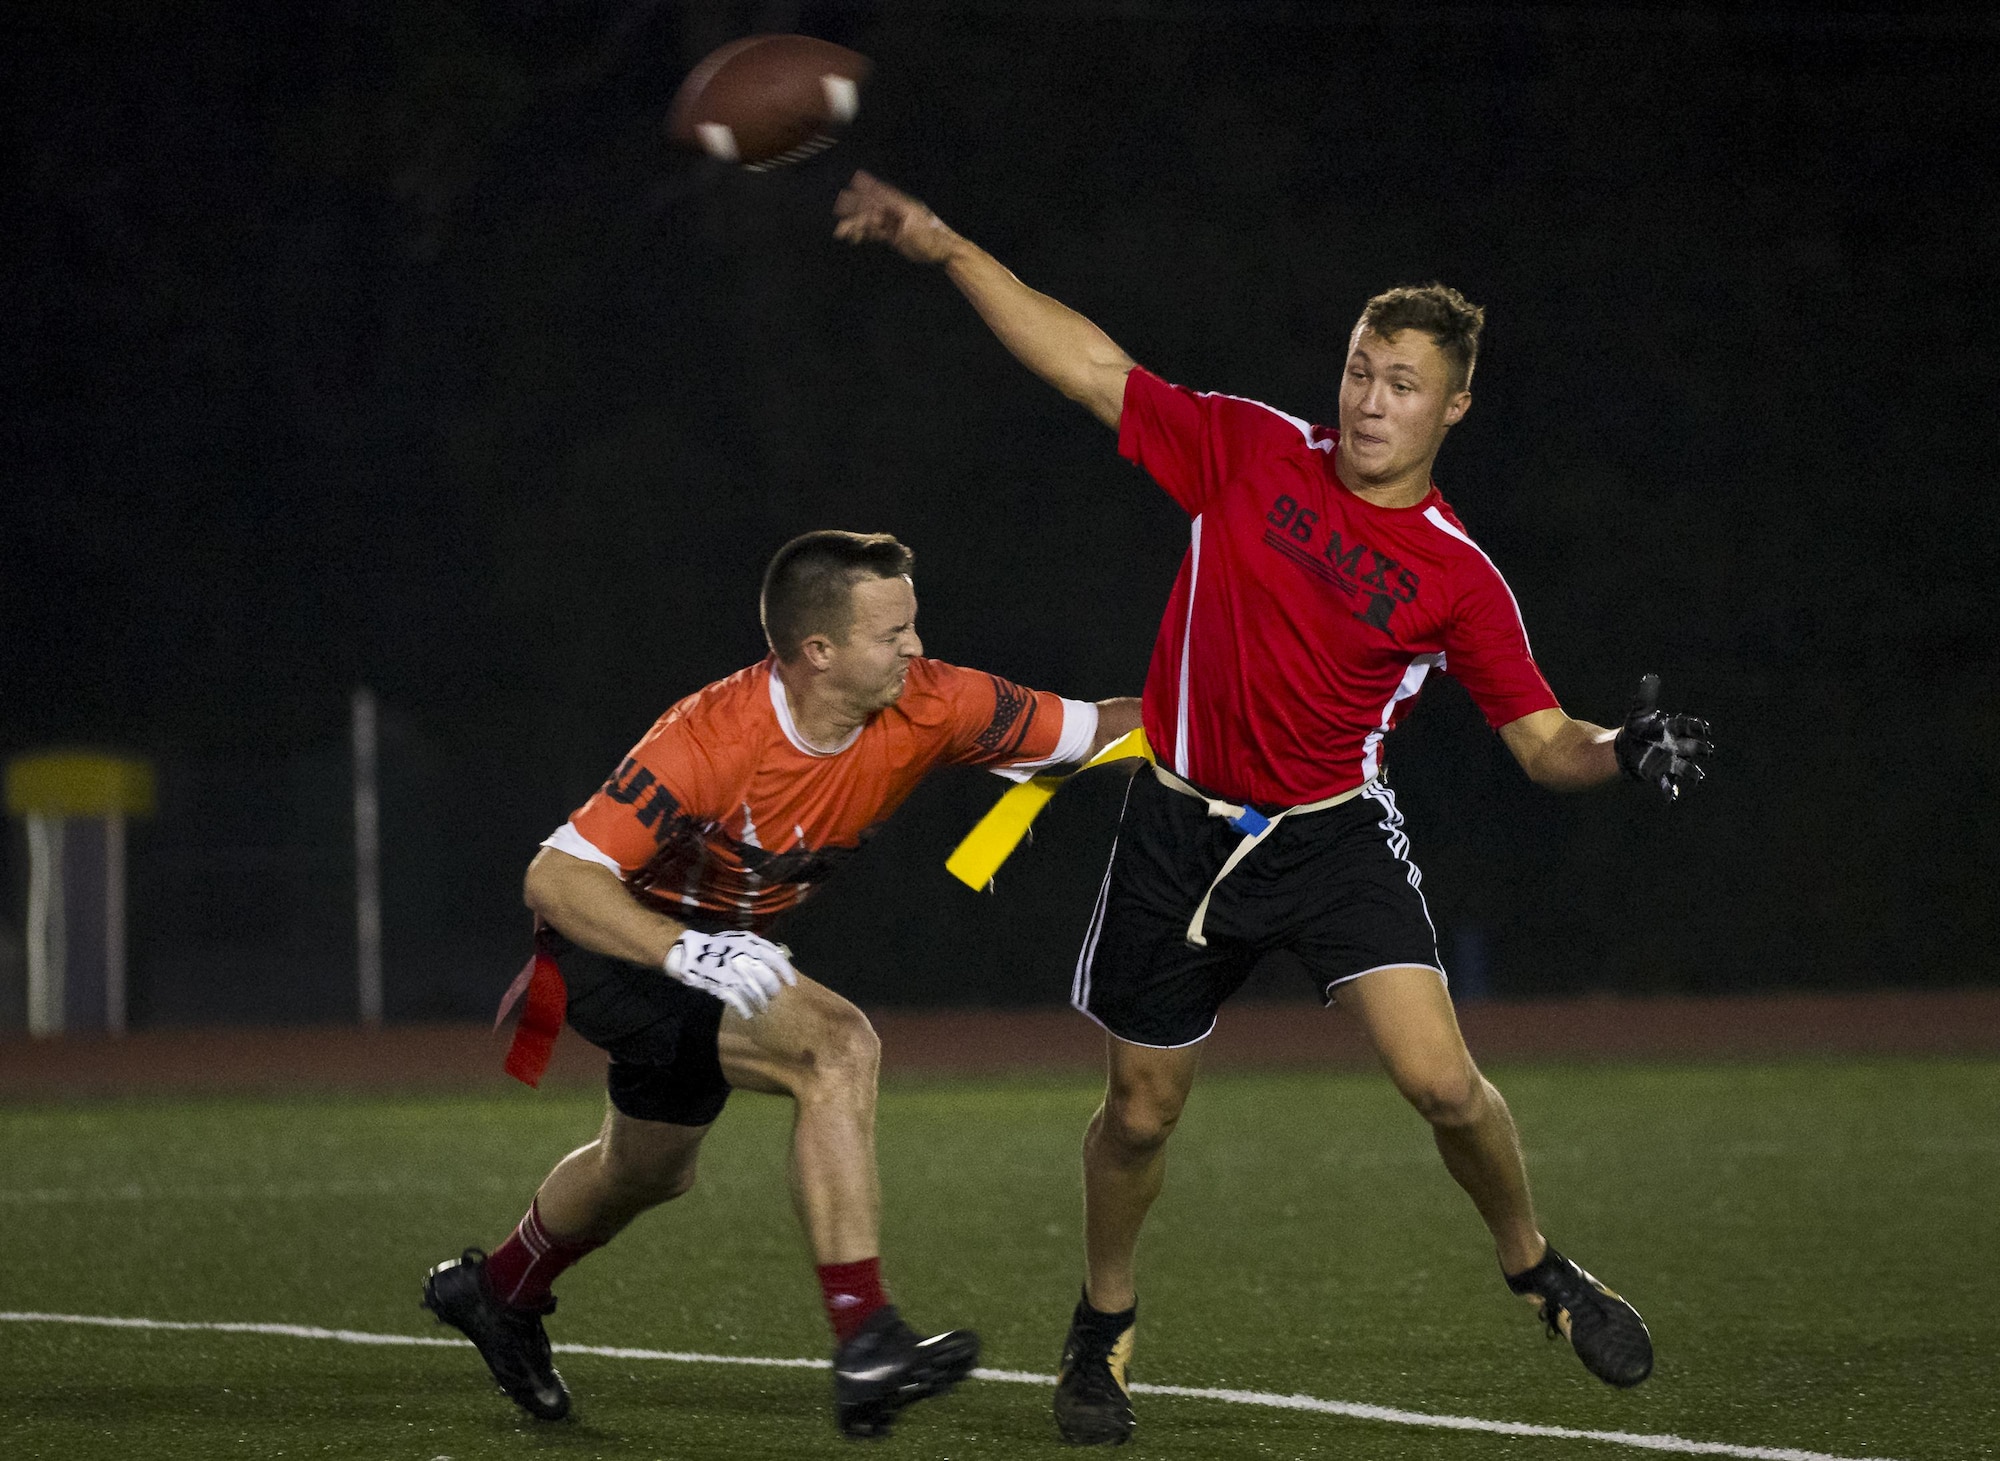 Intramural football action